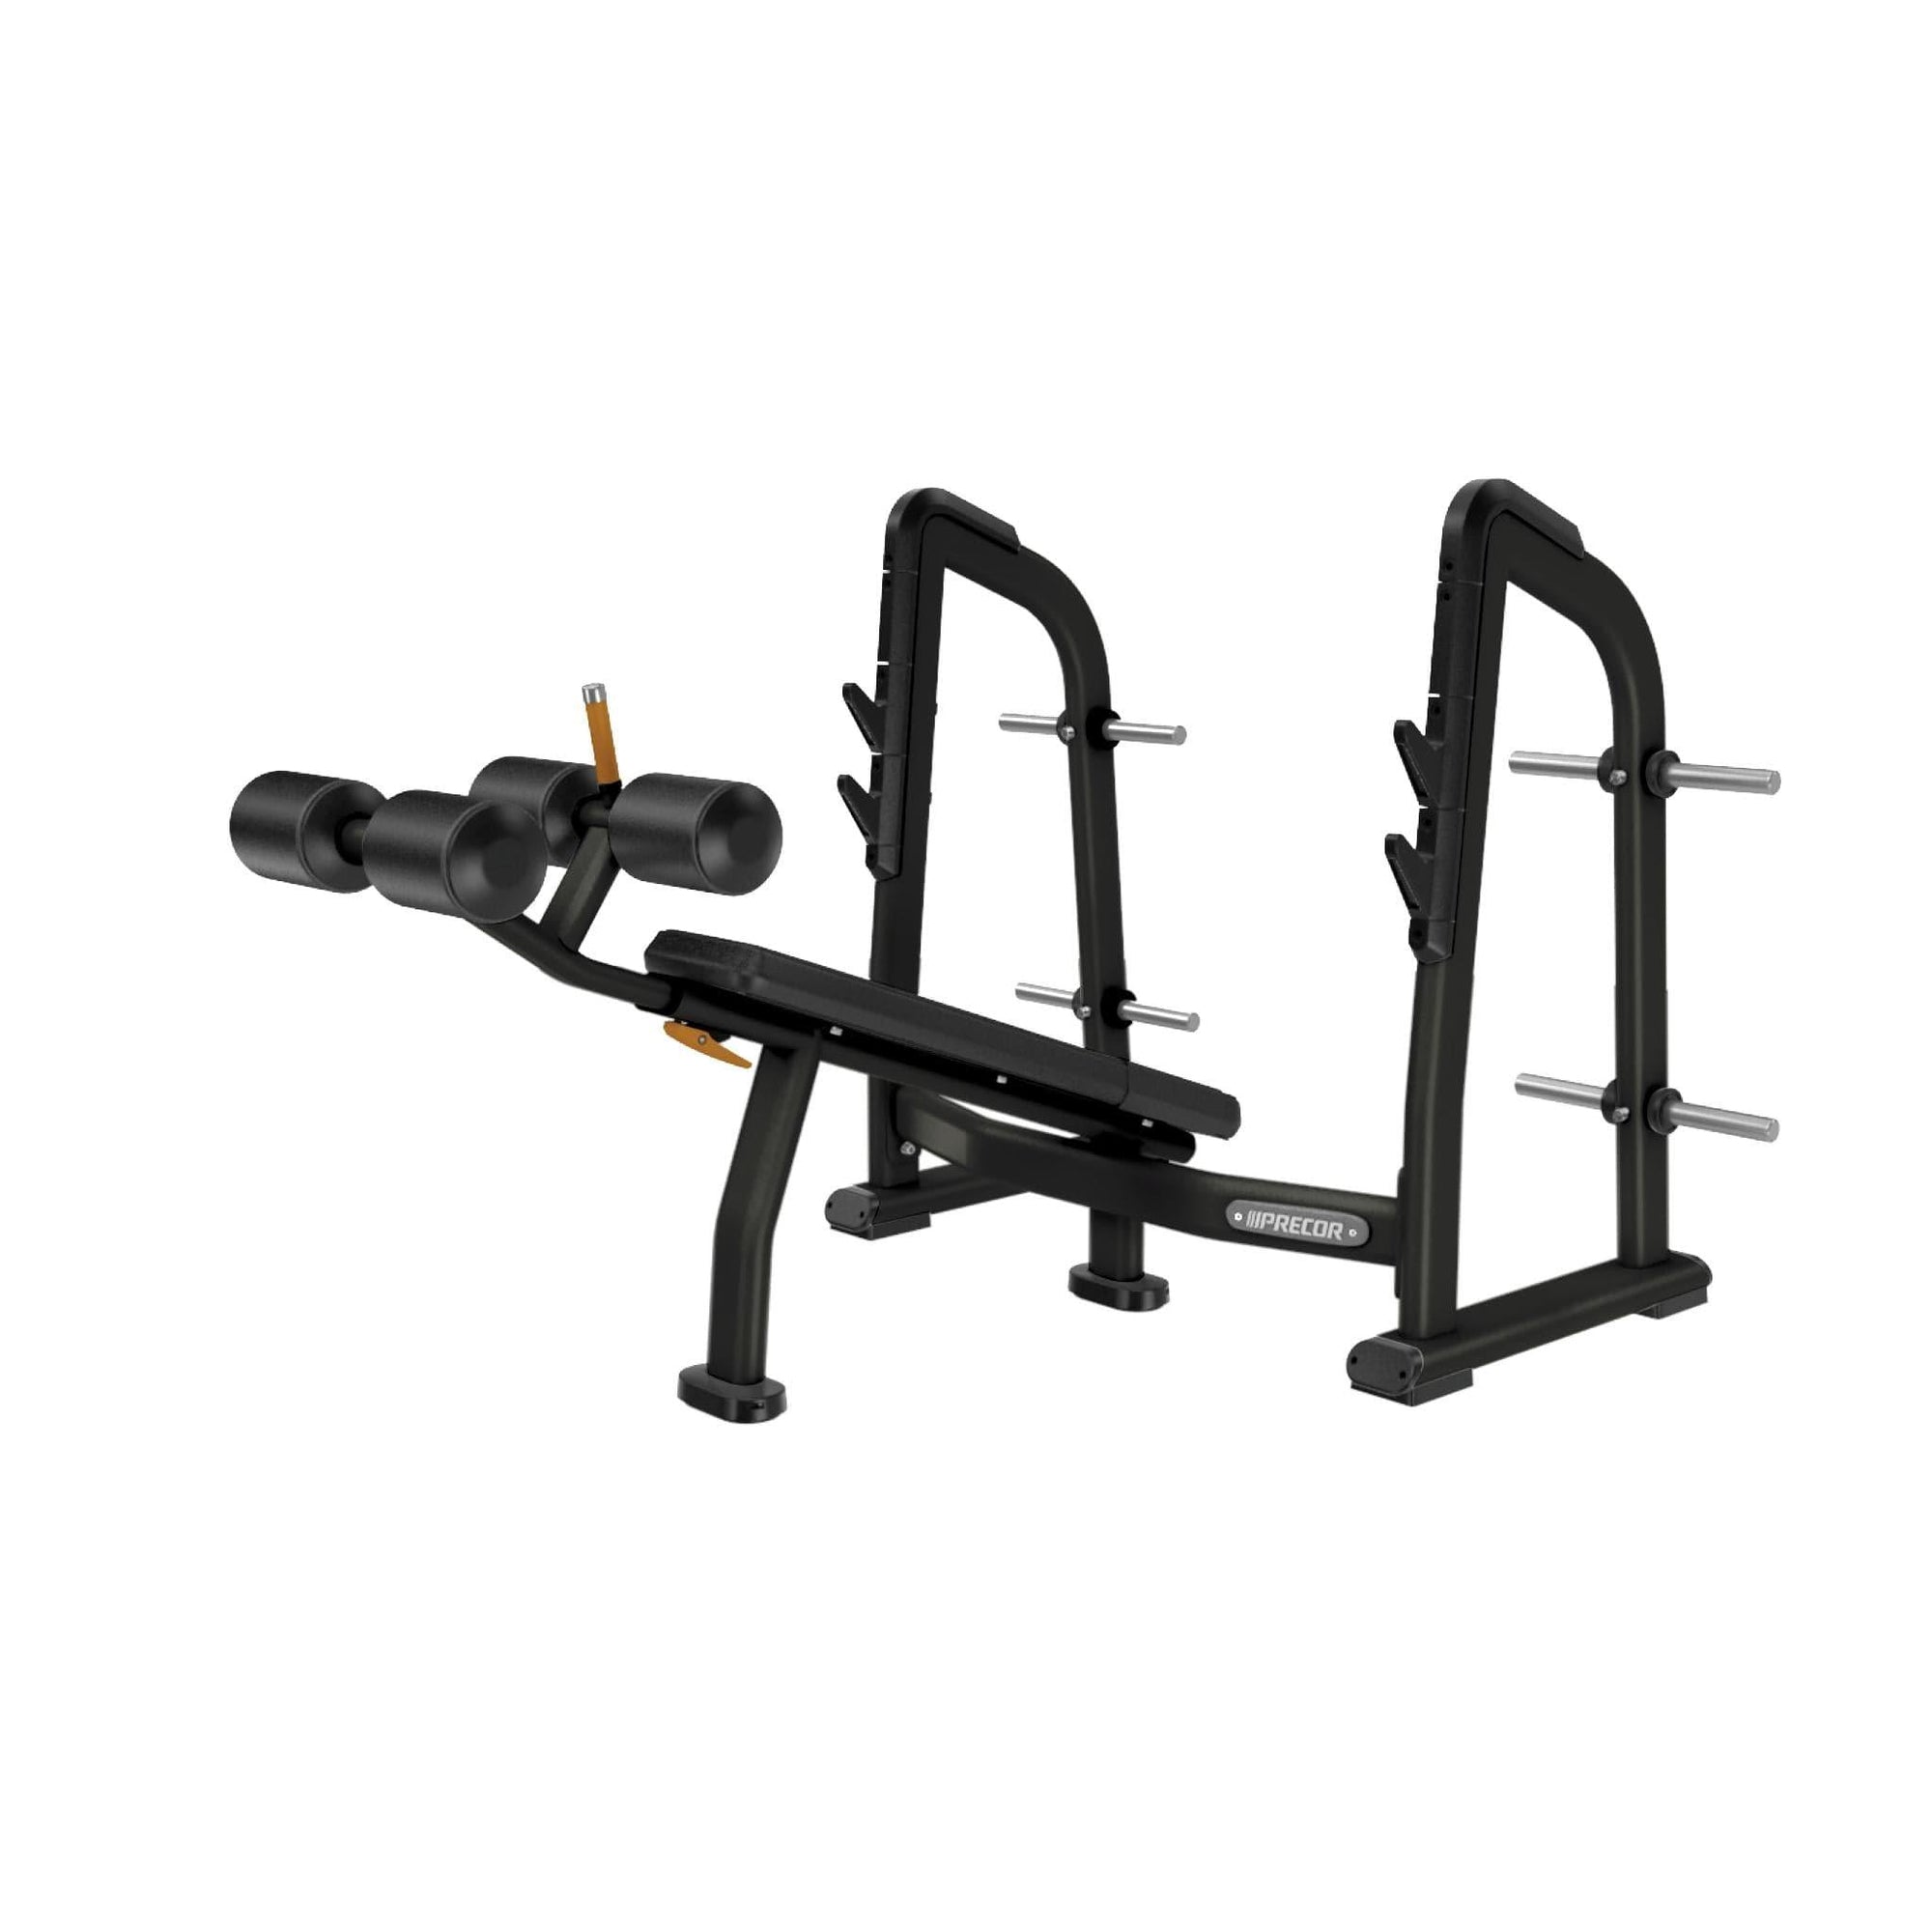 Precor Discovery Series Olympic Decline Bench (DBR0411) Weight Bench Precor Silver